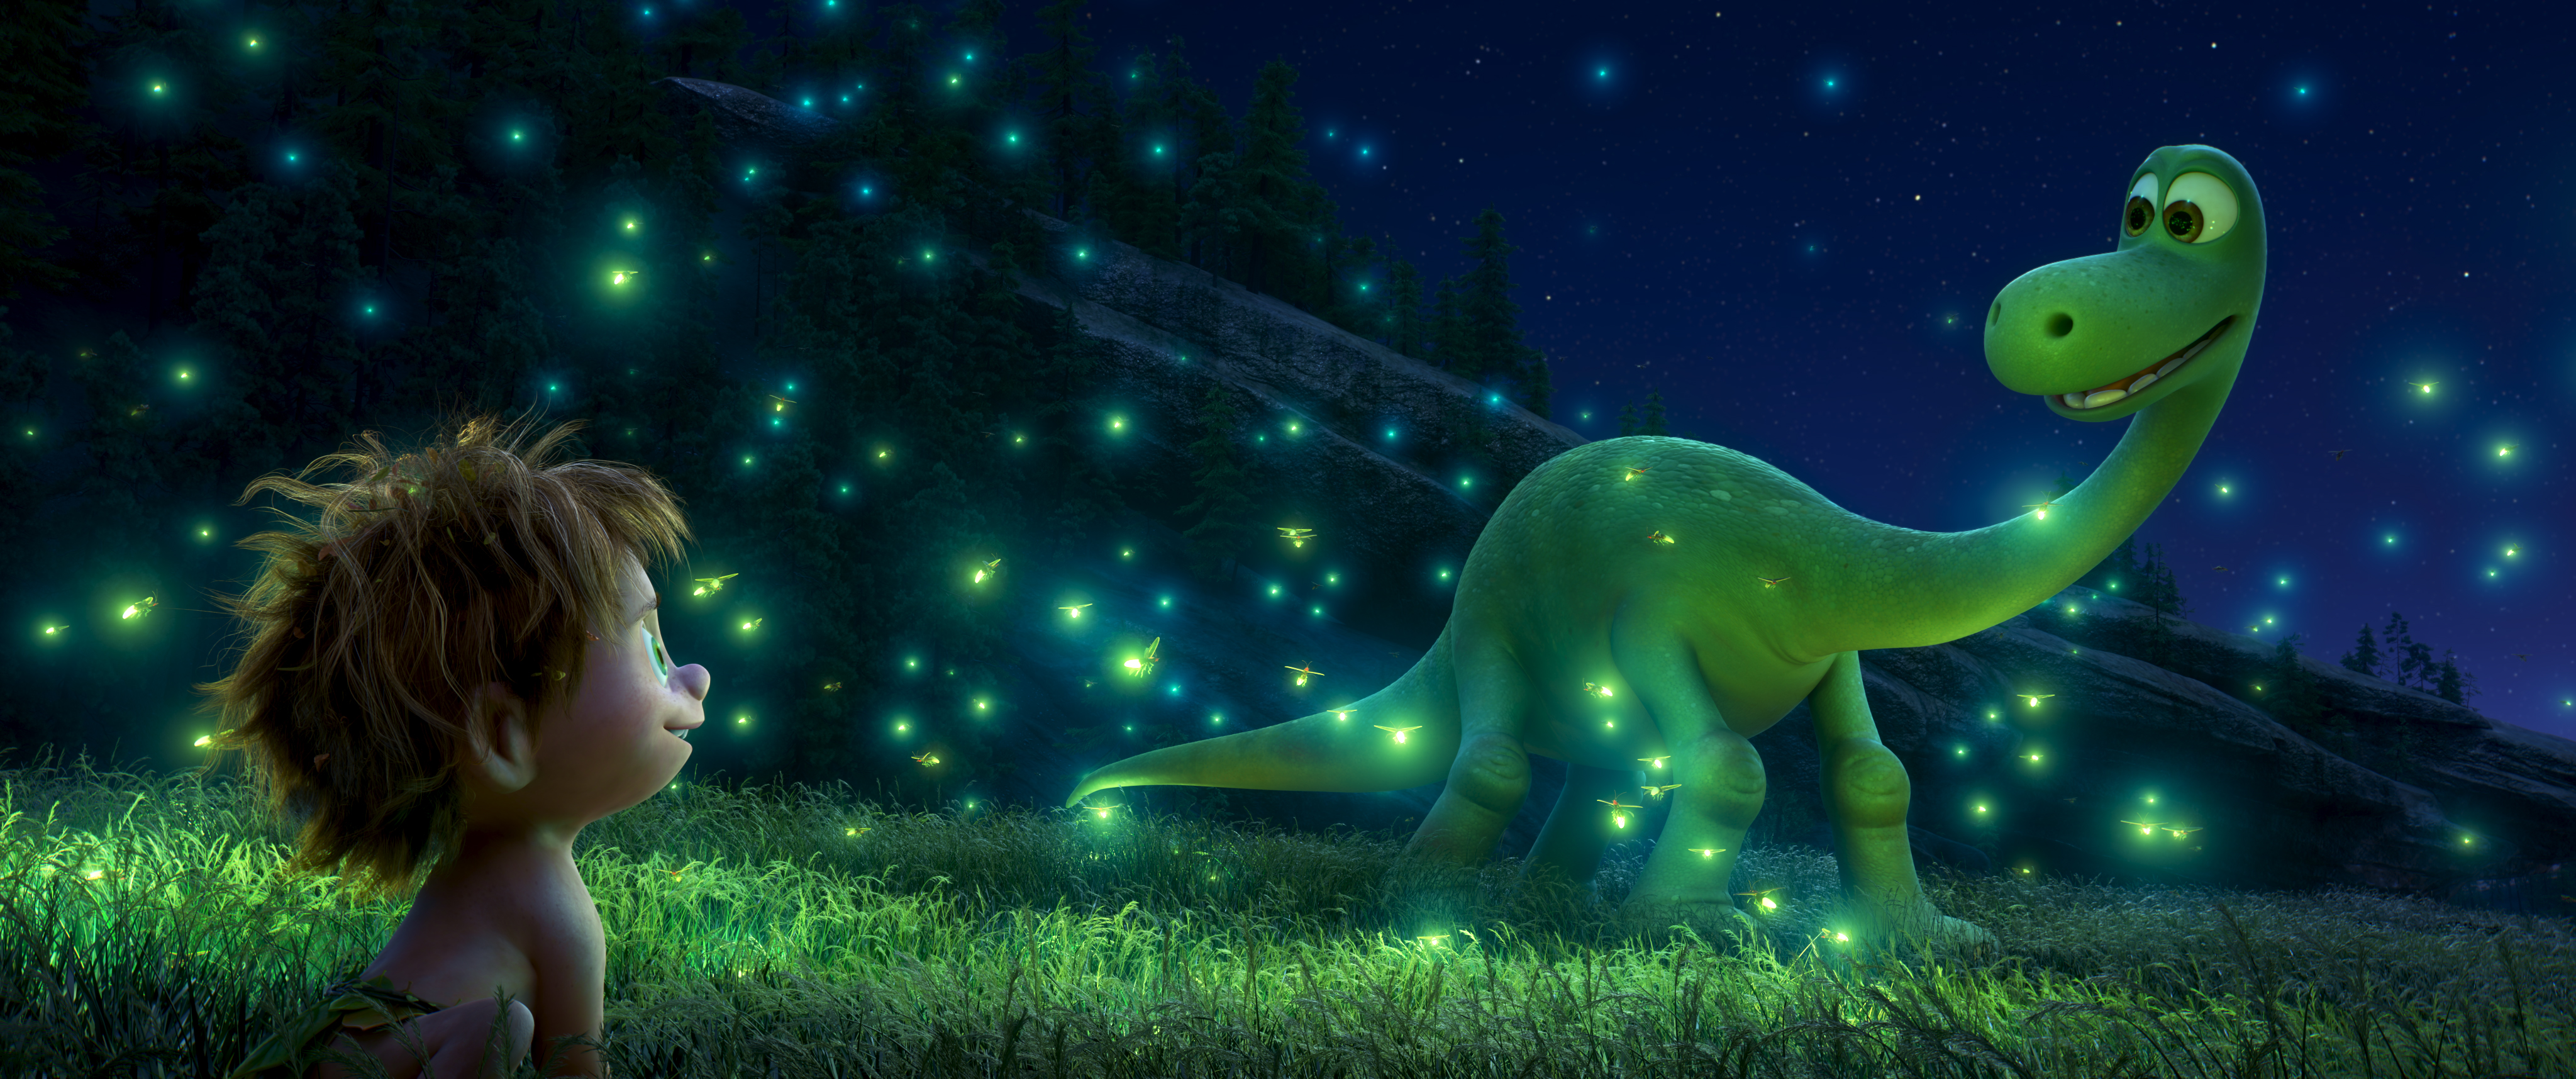 ‘The Good Dinosaur’ trailer is not just good—it’s great